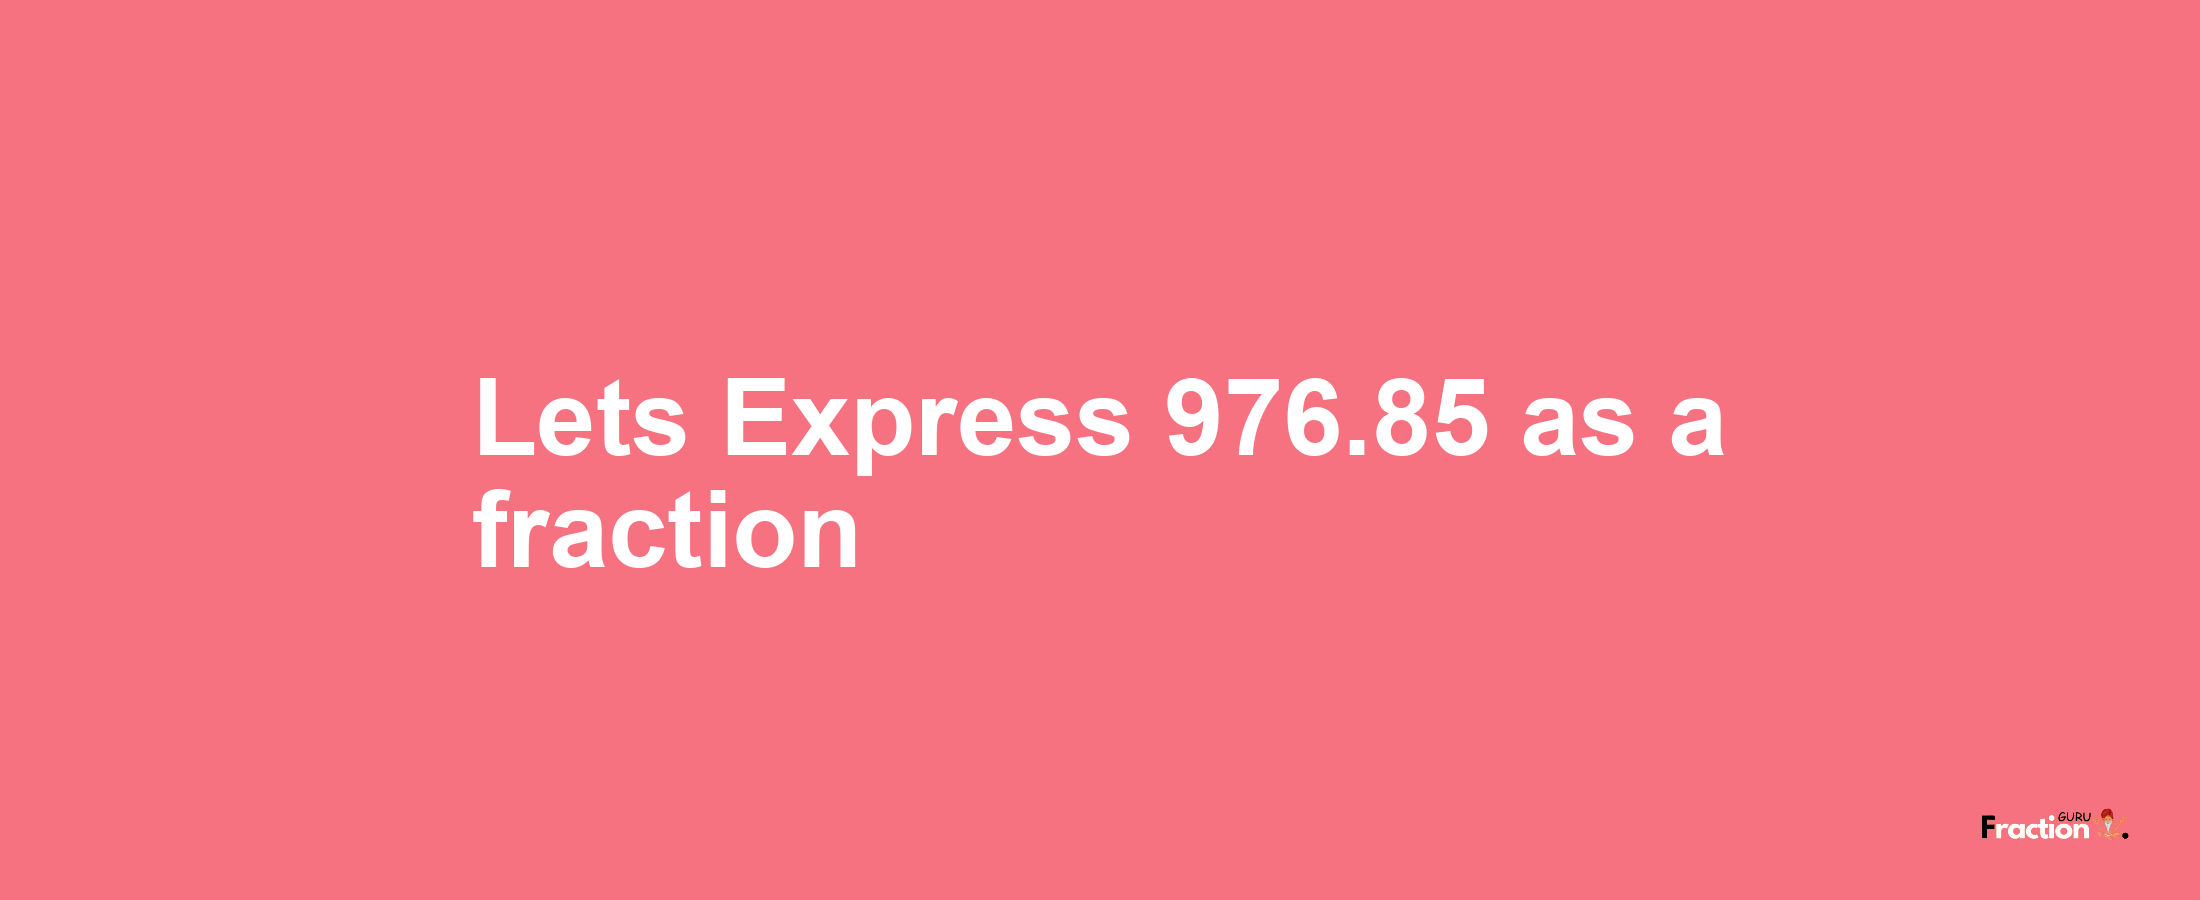 Lets Express 976.85 as afraction